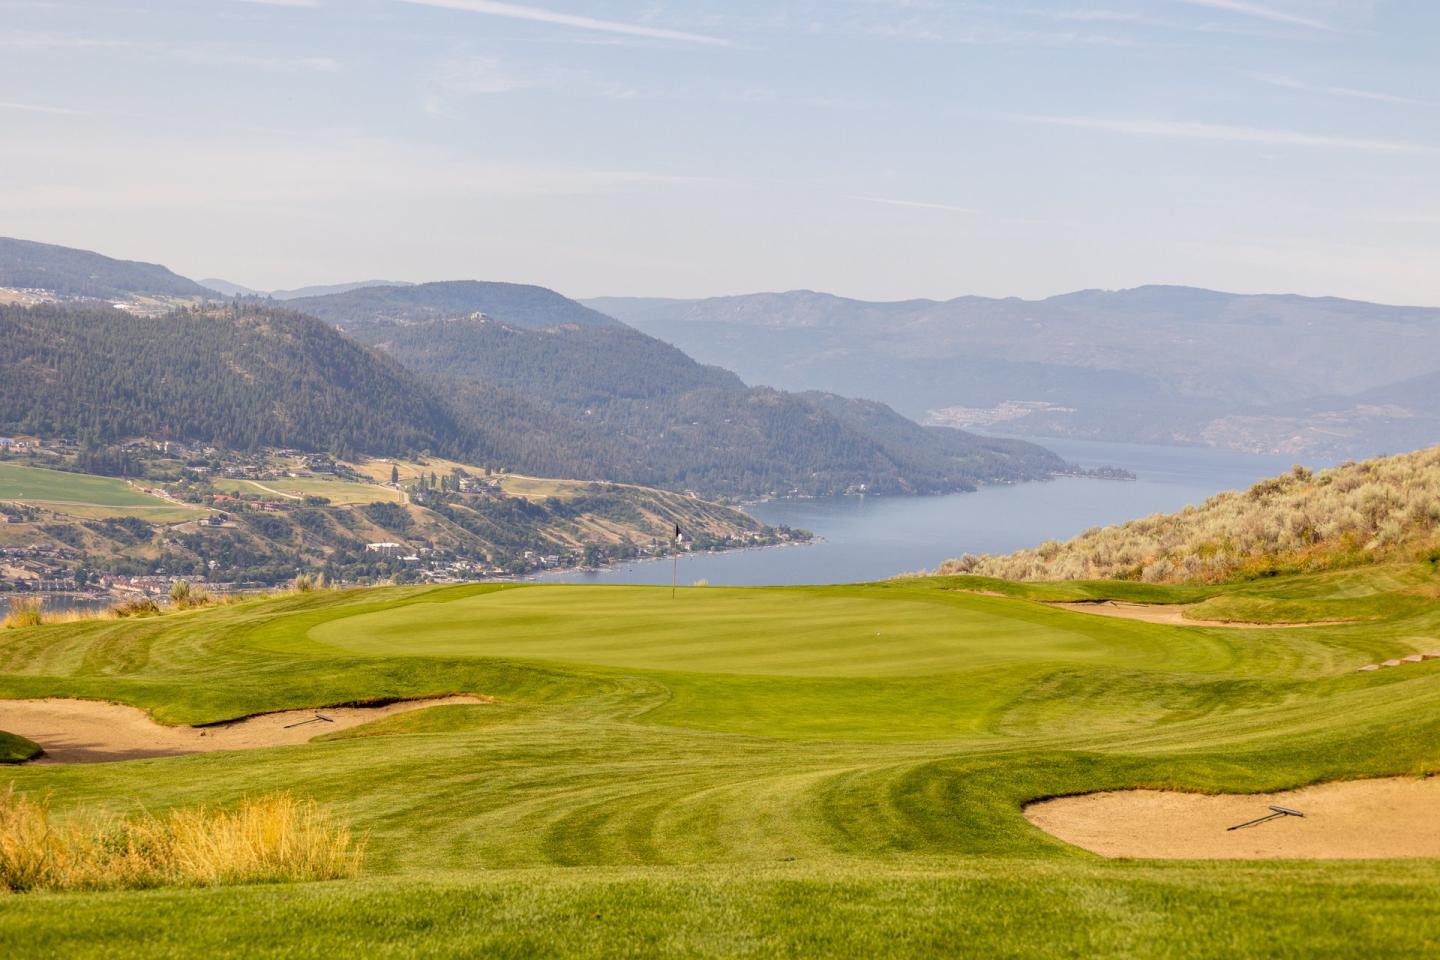 The Rise Golf Course overlooking the lake